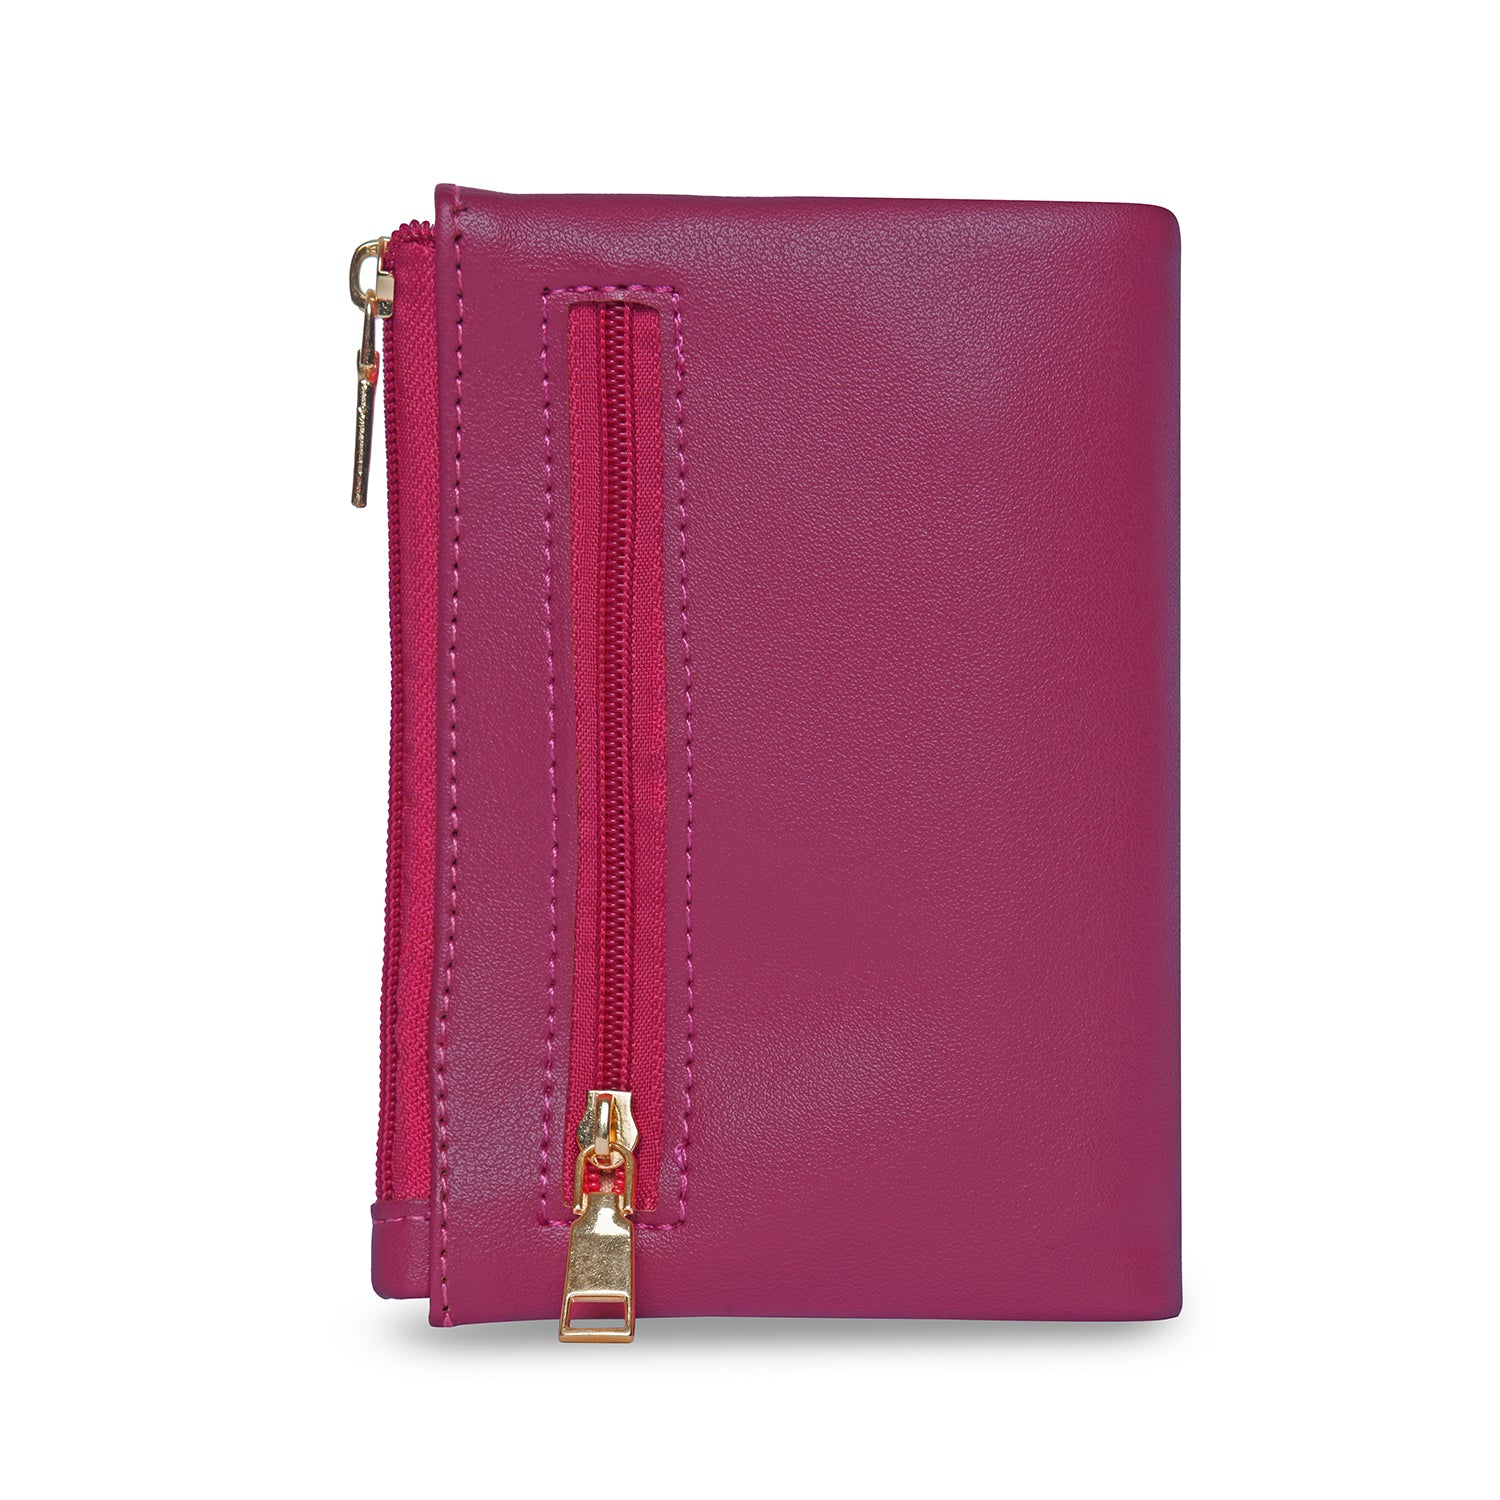 Caprese REMY WALLET SMALL